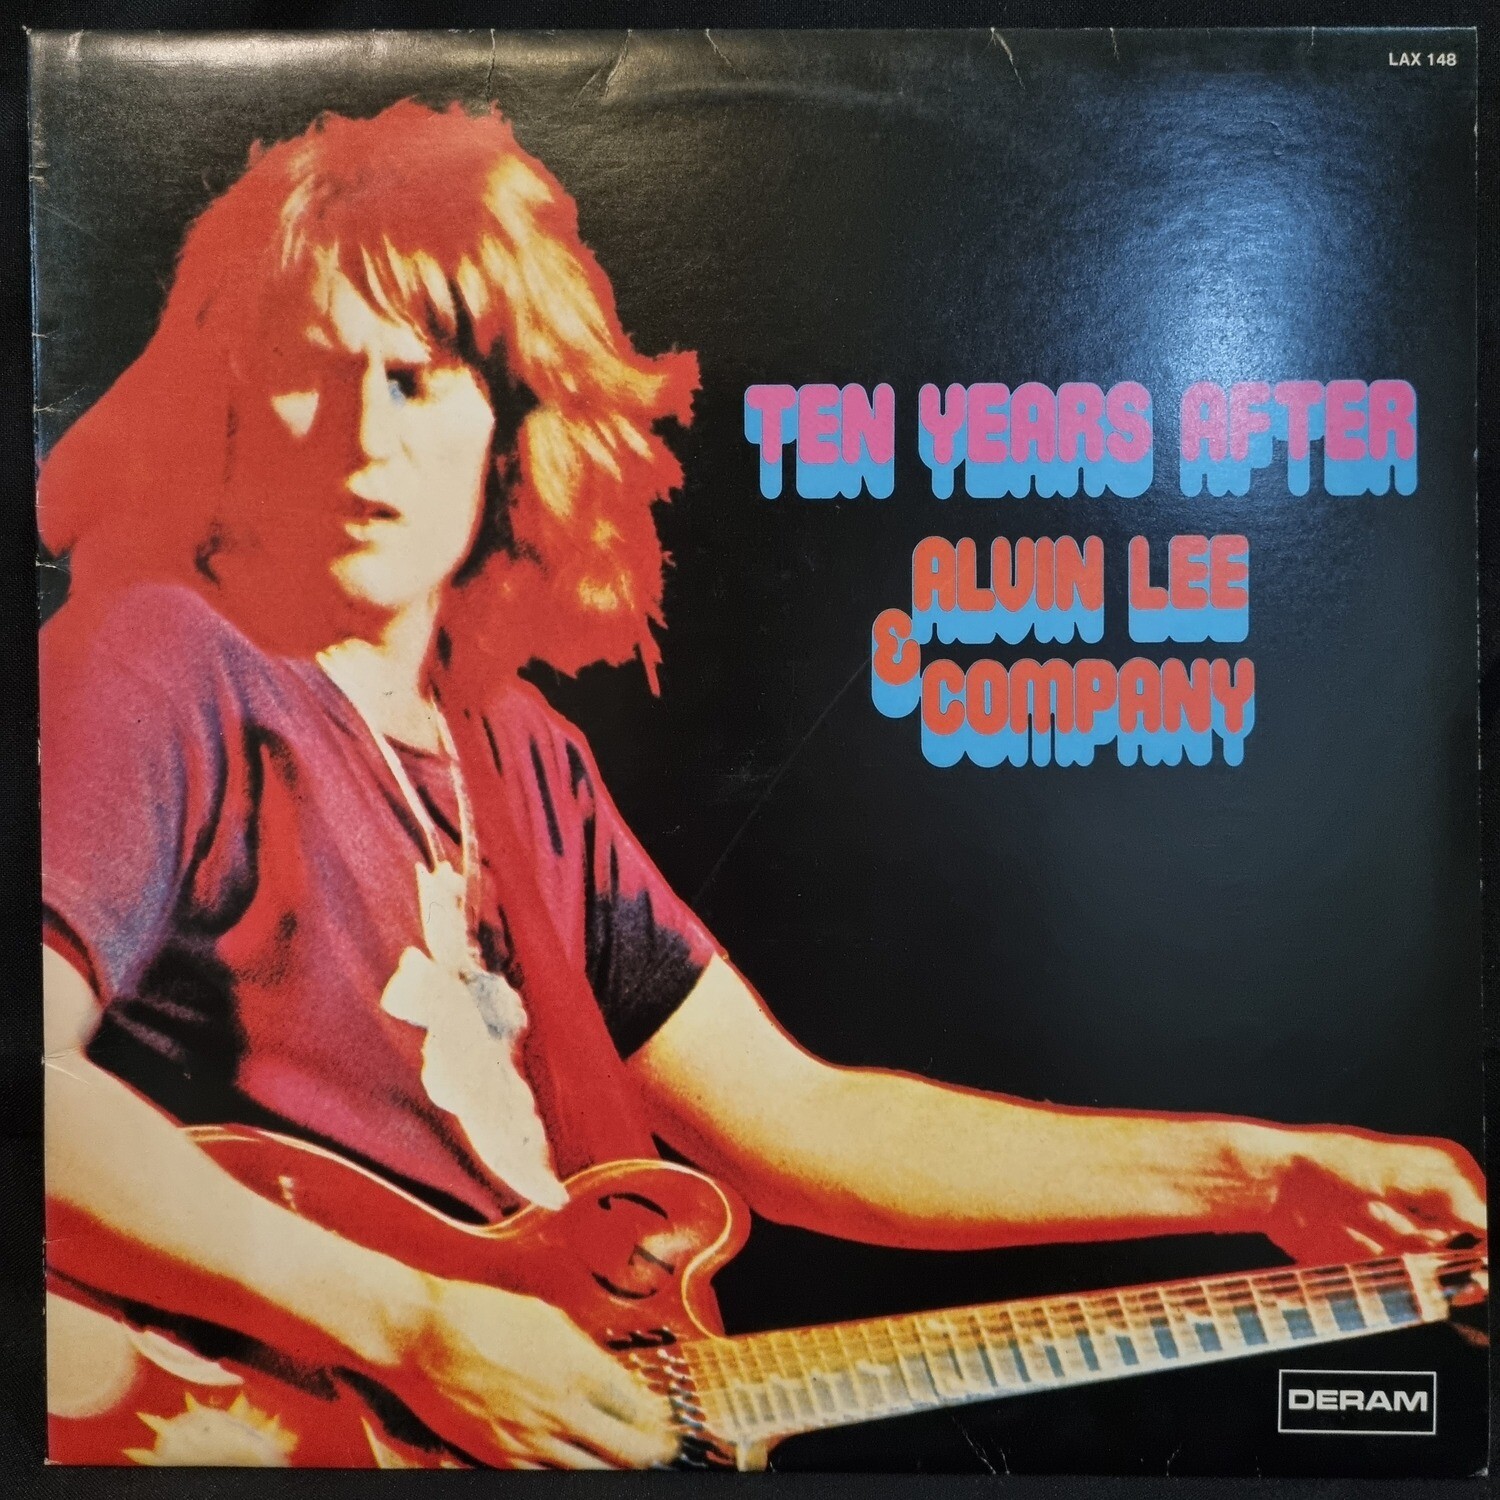 Ten Years After- Alvin Lee & Company